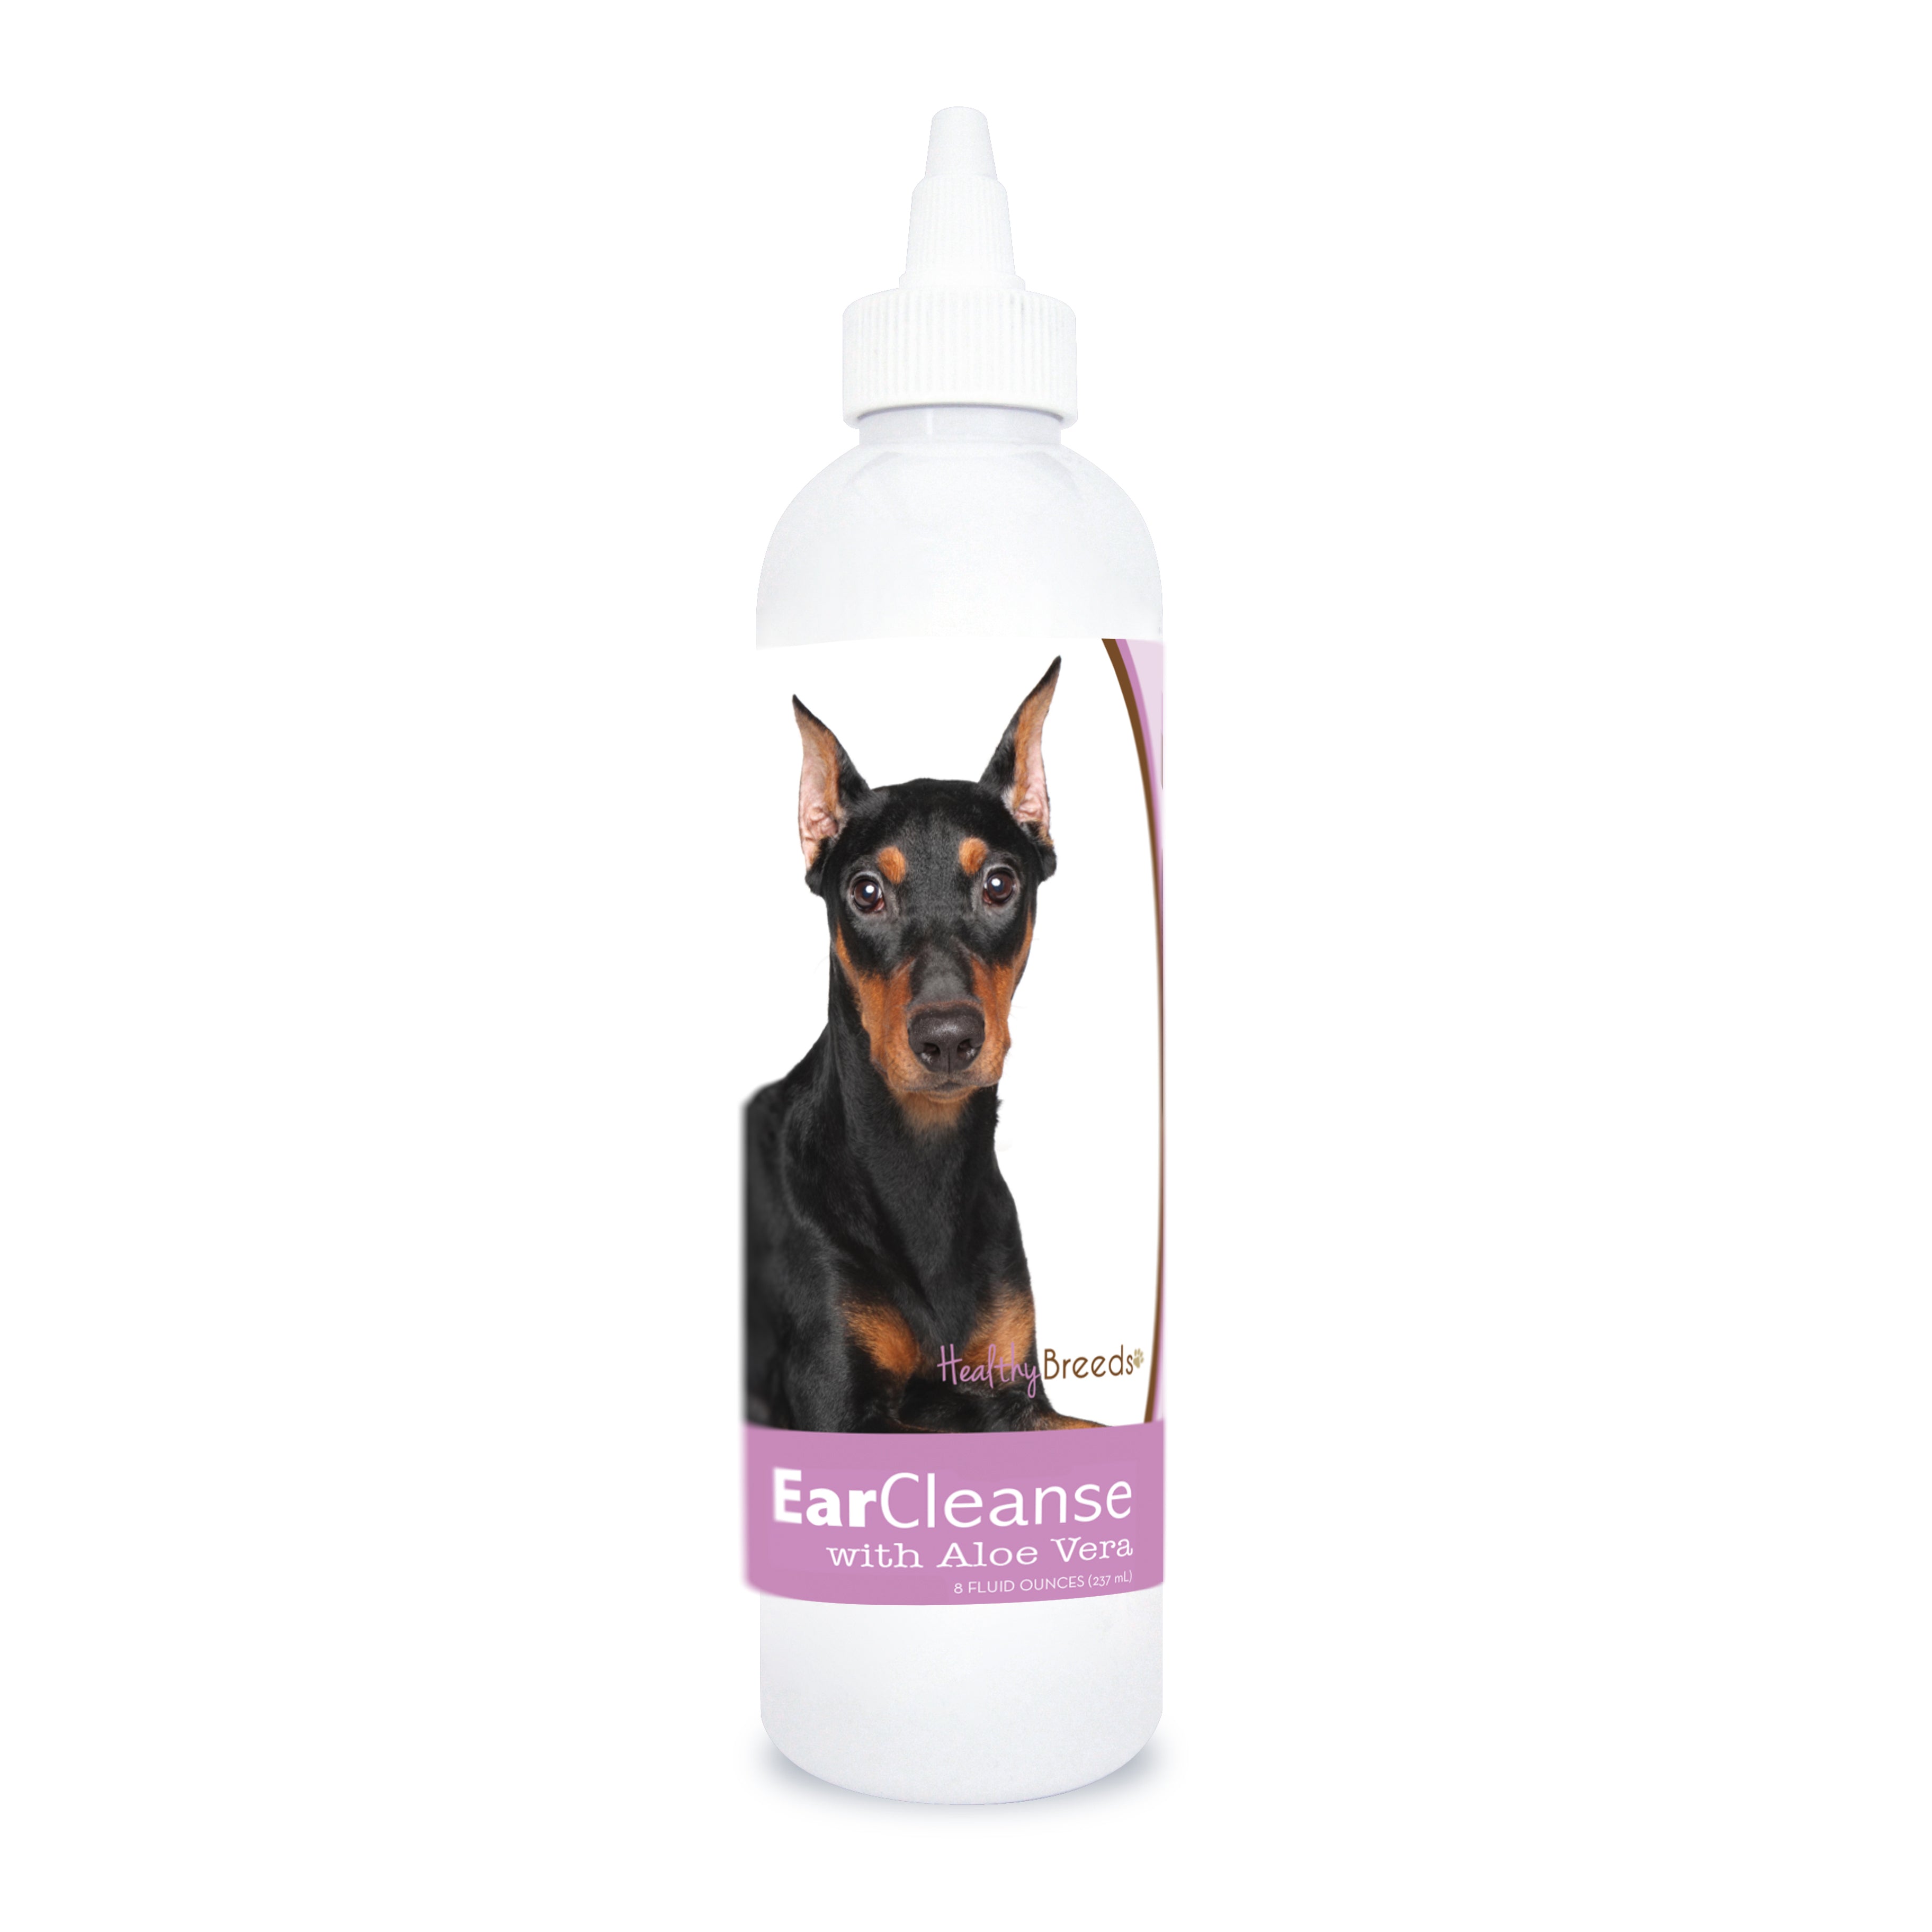 German Pinscher Ear Cleanse with Aloe Vera Sweet Pea and Vanilla 8 oz